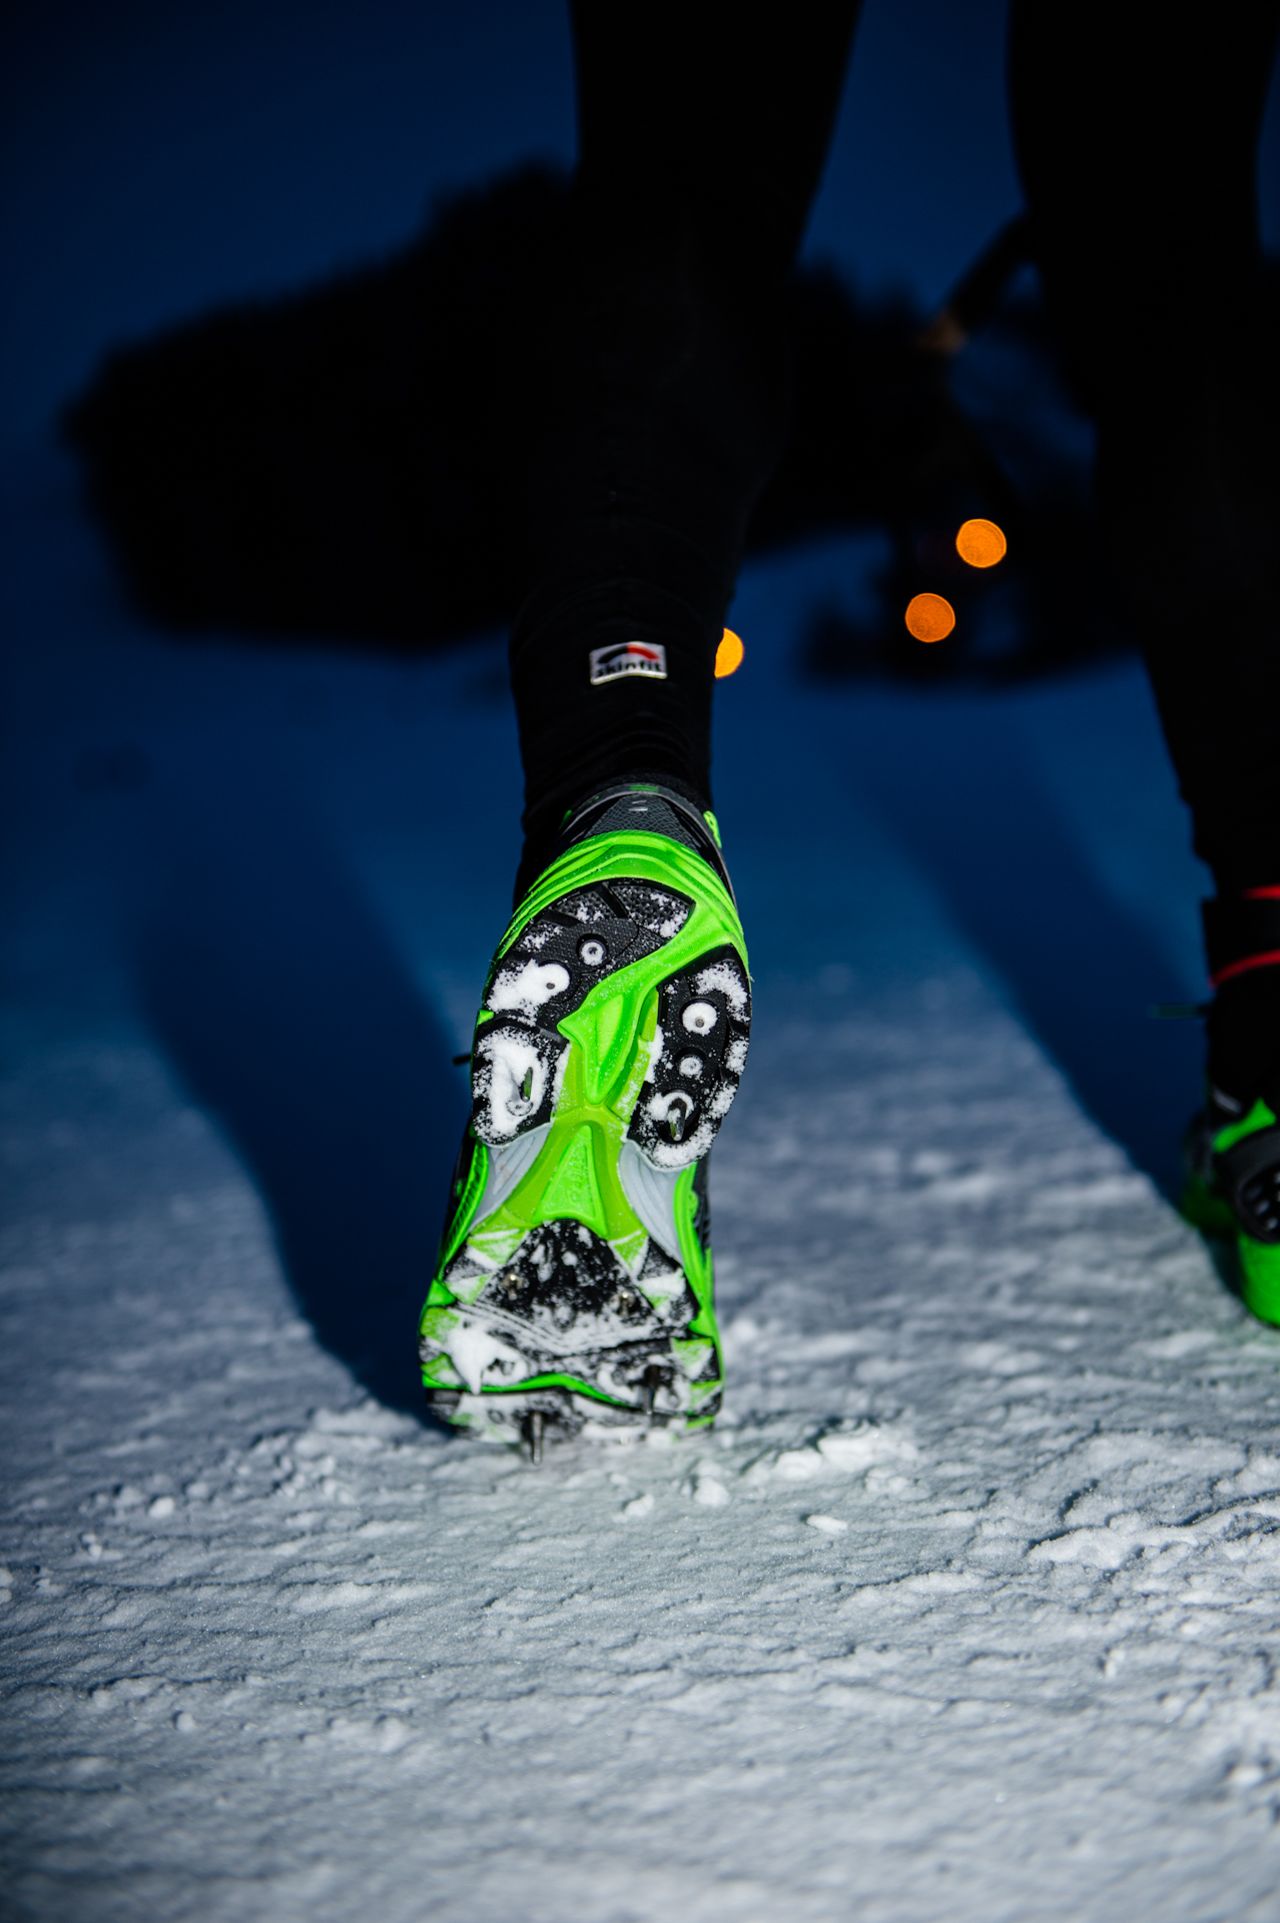 Most competitors wear spikes due to the icy conditions underfoot for the duration of the course. Others prefer to use cross-country skis.